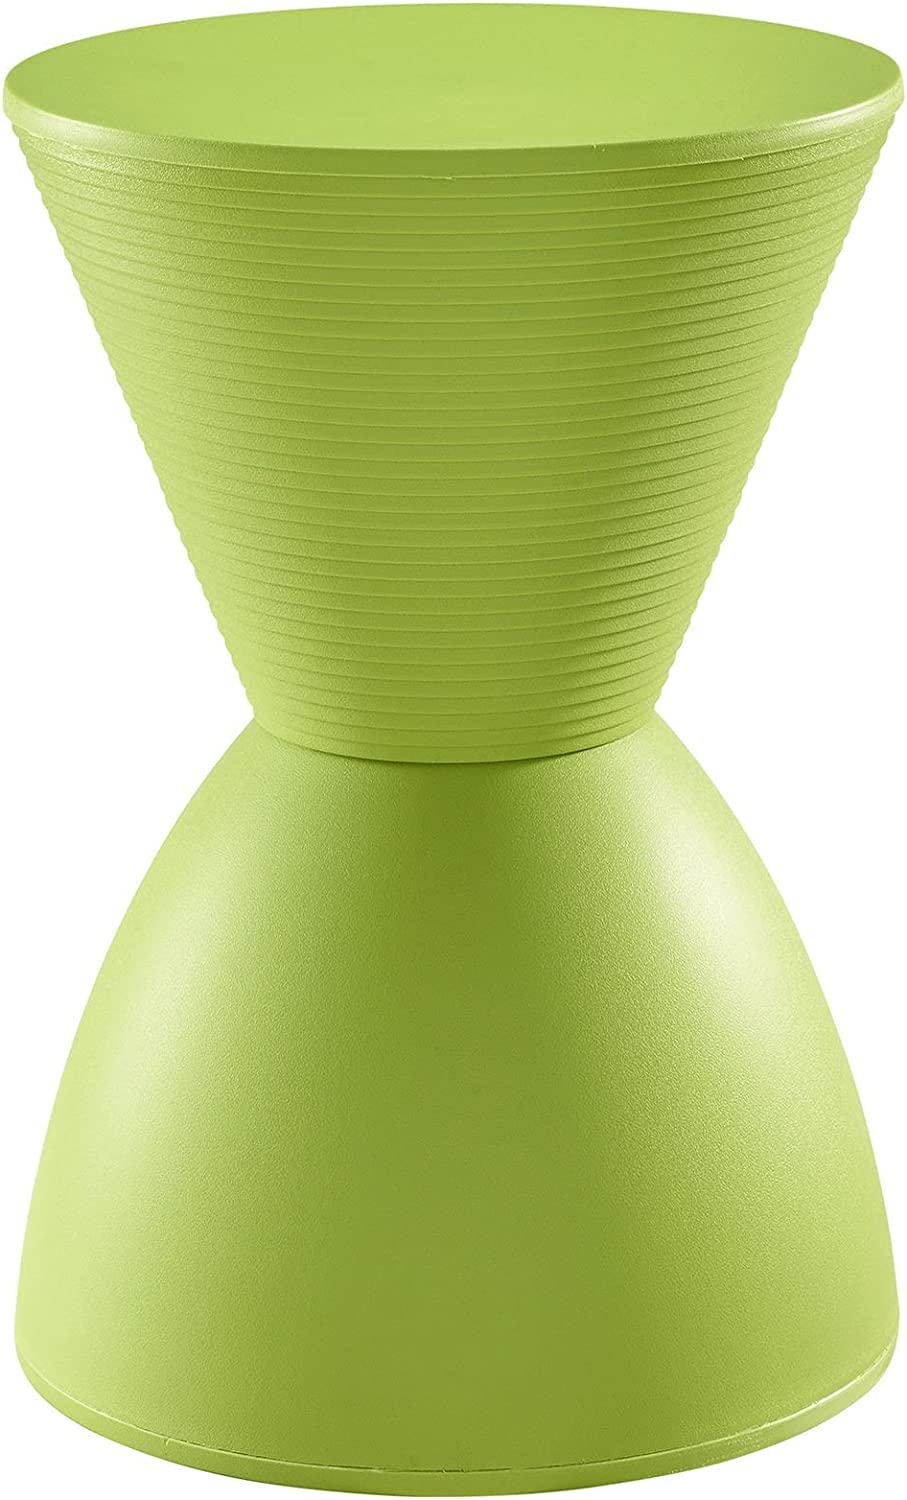 Modway Haste Contemporary Modern Hourglass Accent Stool in Green